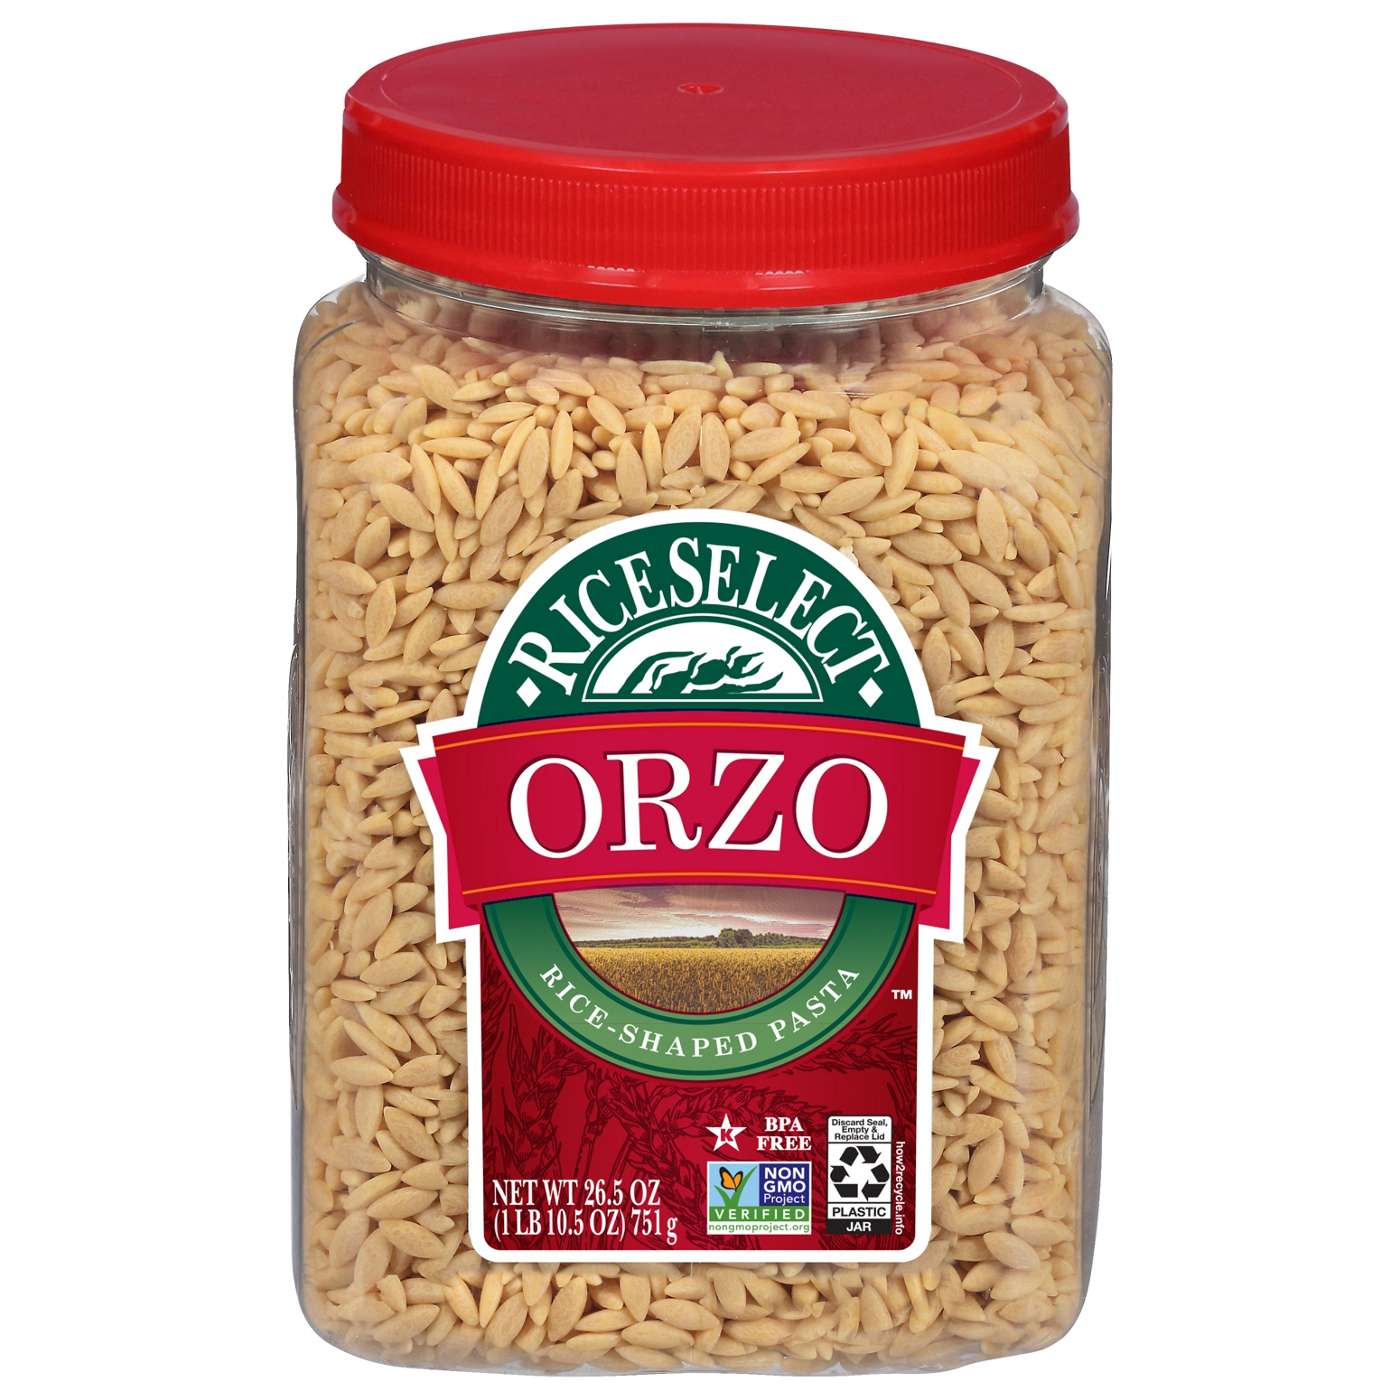 RiceSelect Original Orzo; image 1 of 6